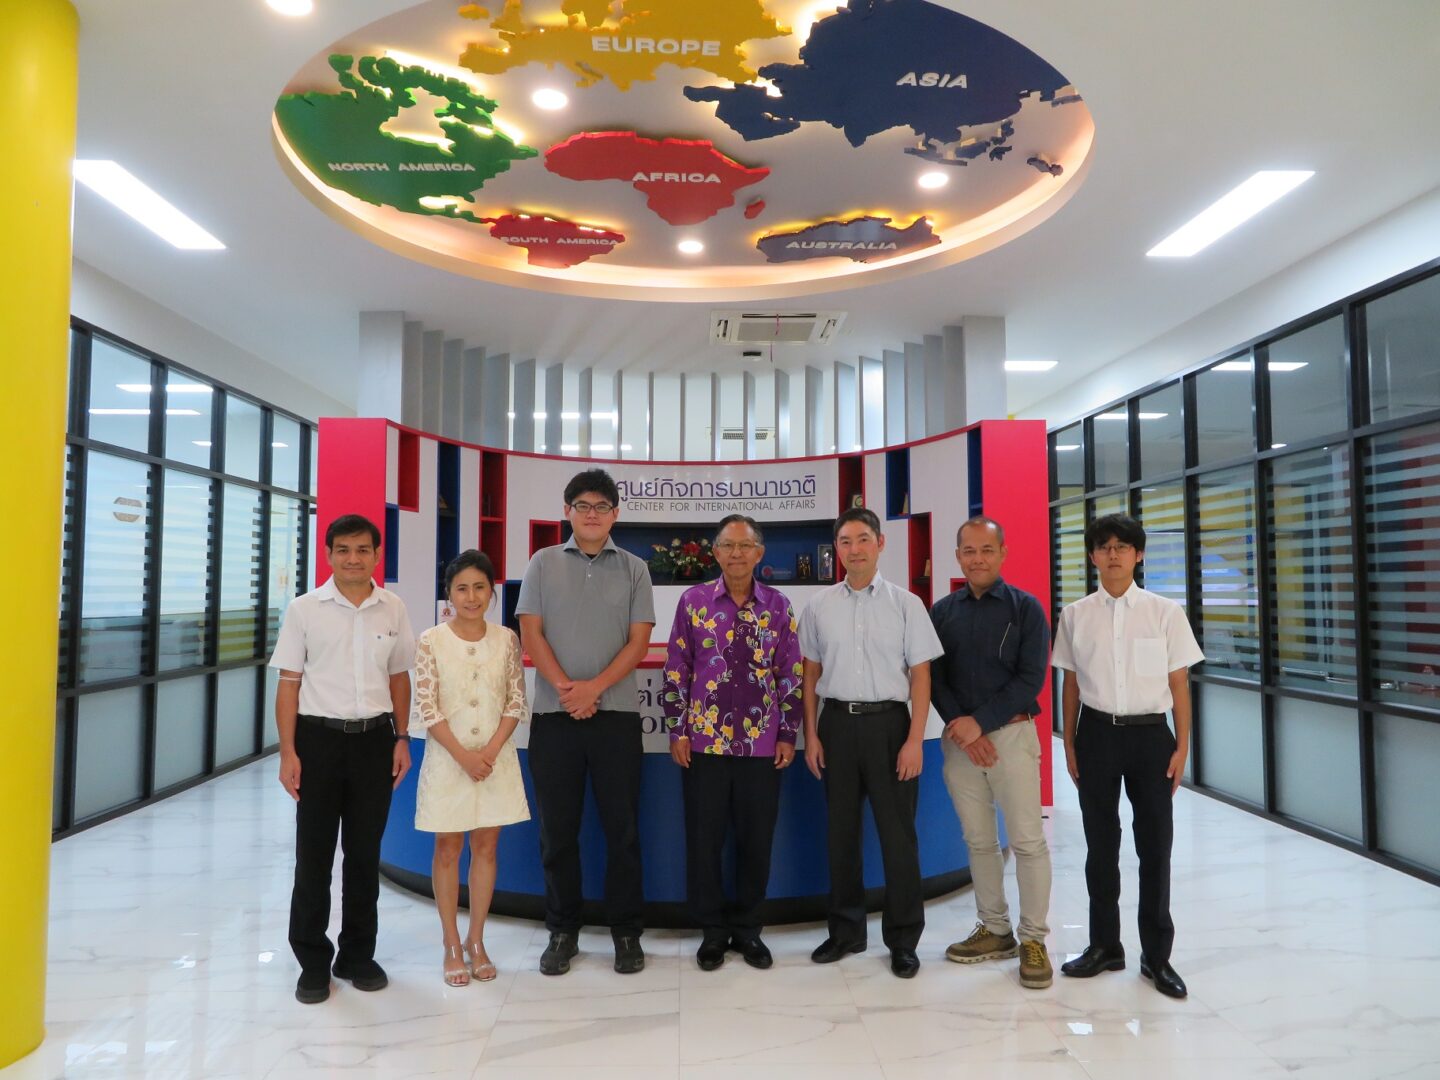 School of Engineering and Technology, Walailak University parters with Faculty of Science and Engineering, Kyushu Sangyo University in development of student and staff mobility program.